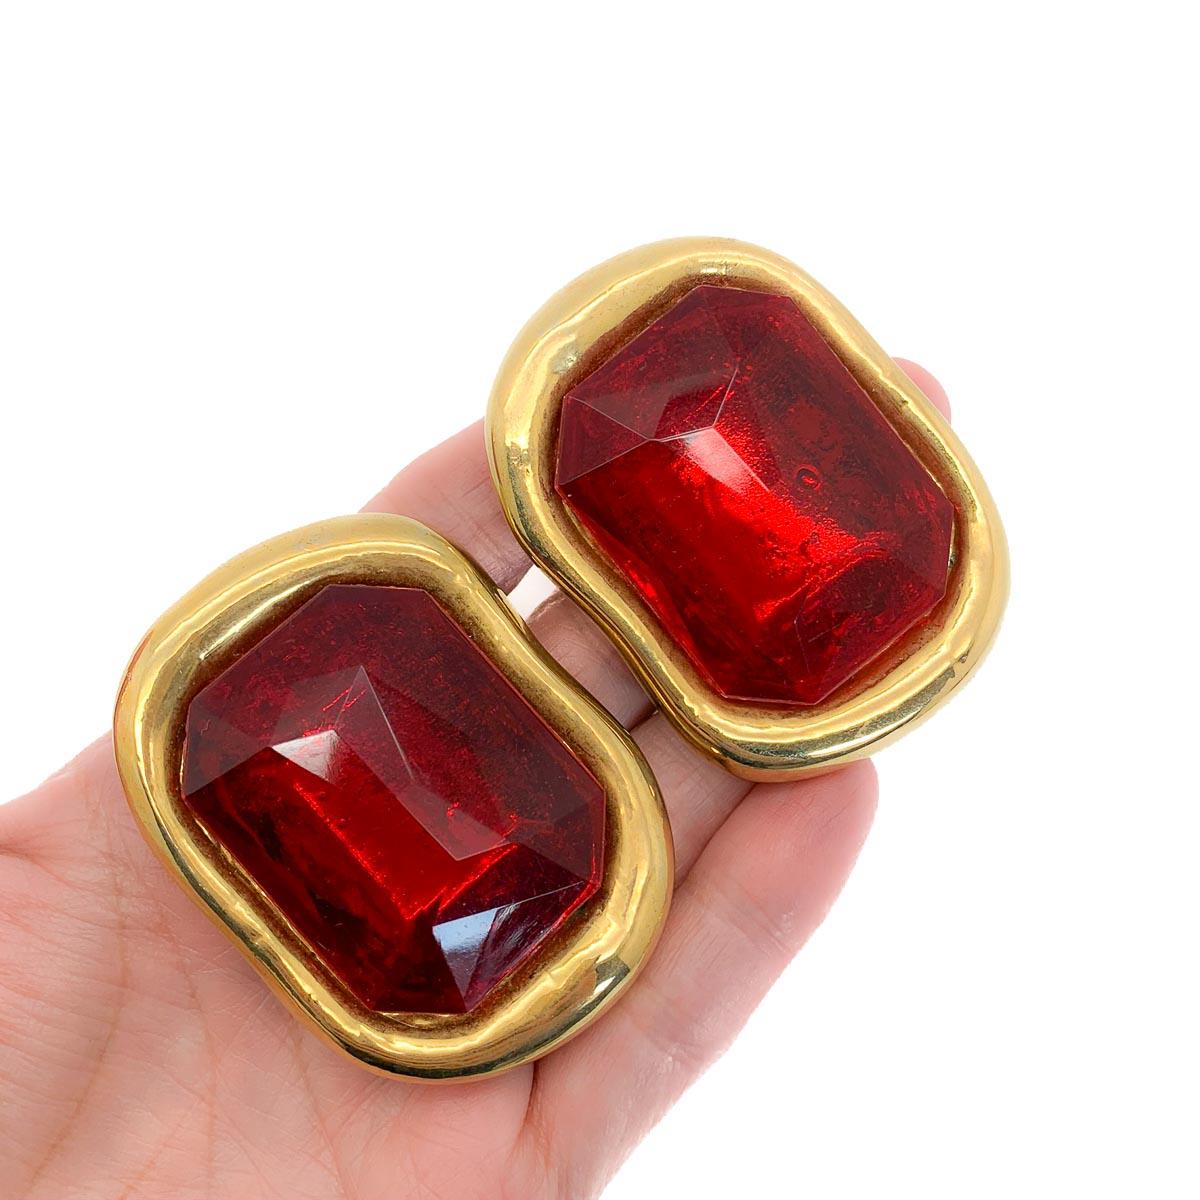 Huge Runway Vintage Red Givenchy Earrings. Featuring flowing metal mounts set with huge resin panels in vibrant red emulating faceted red stones. In very good vintage condition, signed, 5.6cms. Whilst the clips remain very strong on these earrings